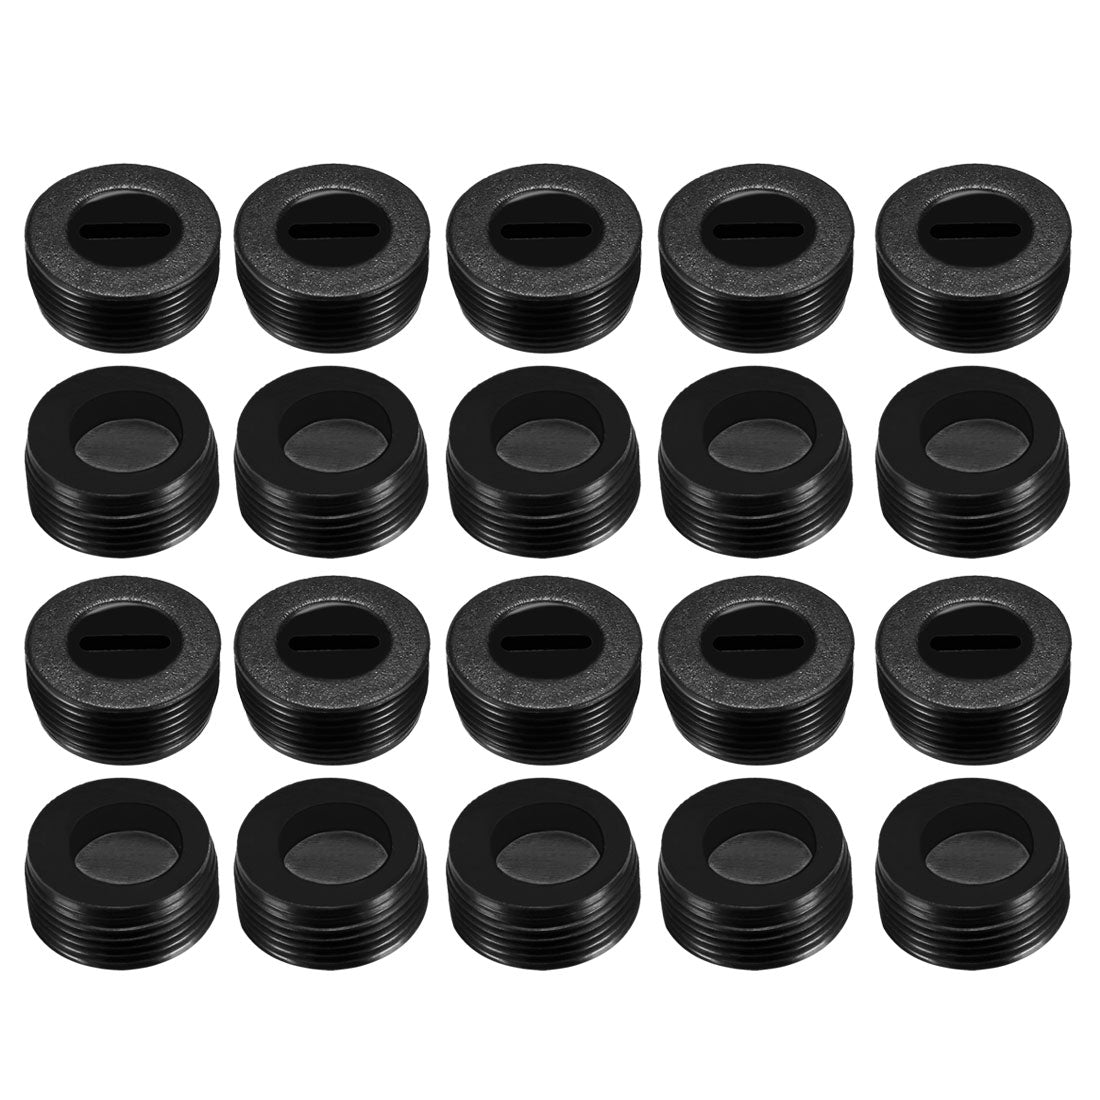 uxcell Uxcell Carbon Brush Holder Caps 17mm O.D. 9.5mm I.D. 7.7mm Thickness Motor Brush Cover Plastic Fitting Thread Black 20pcs